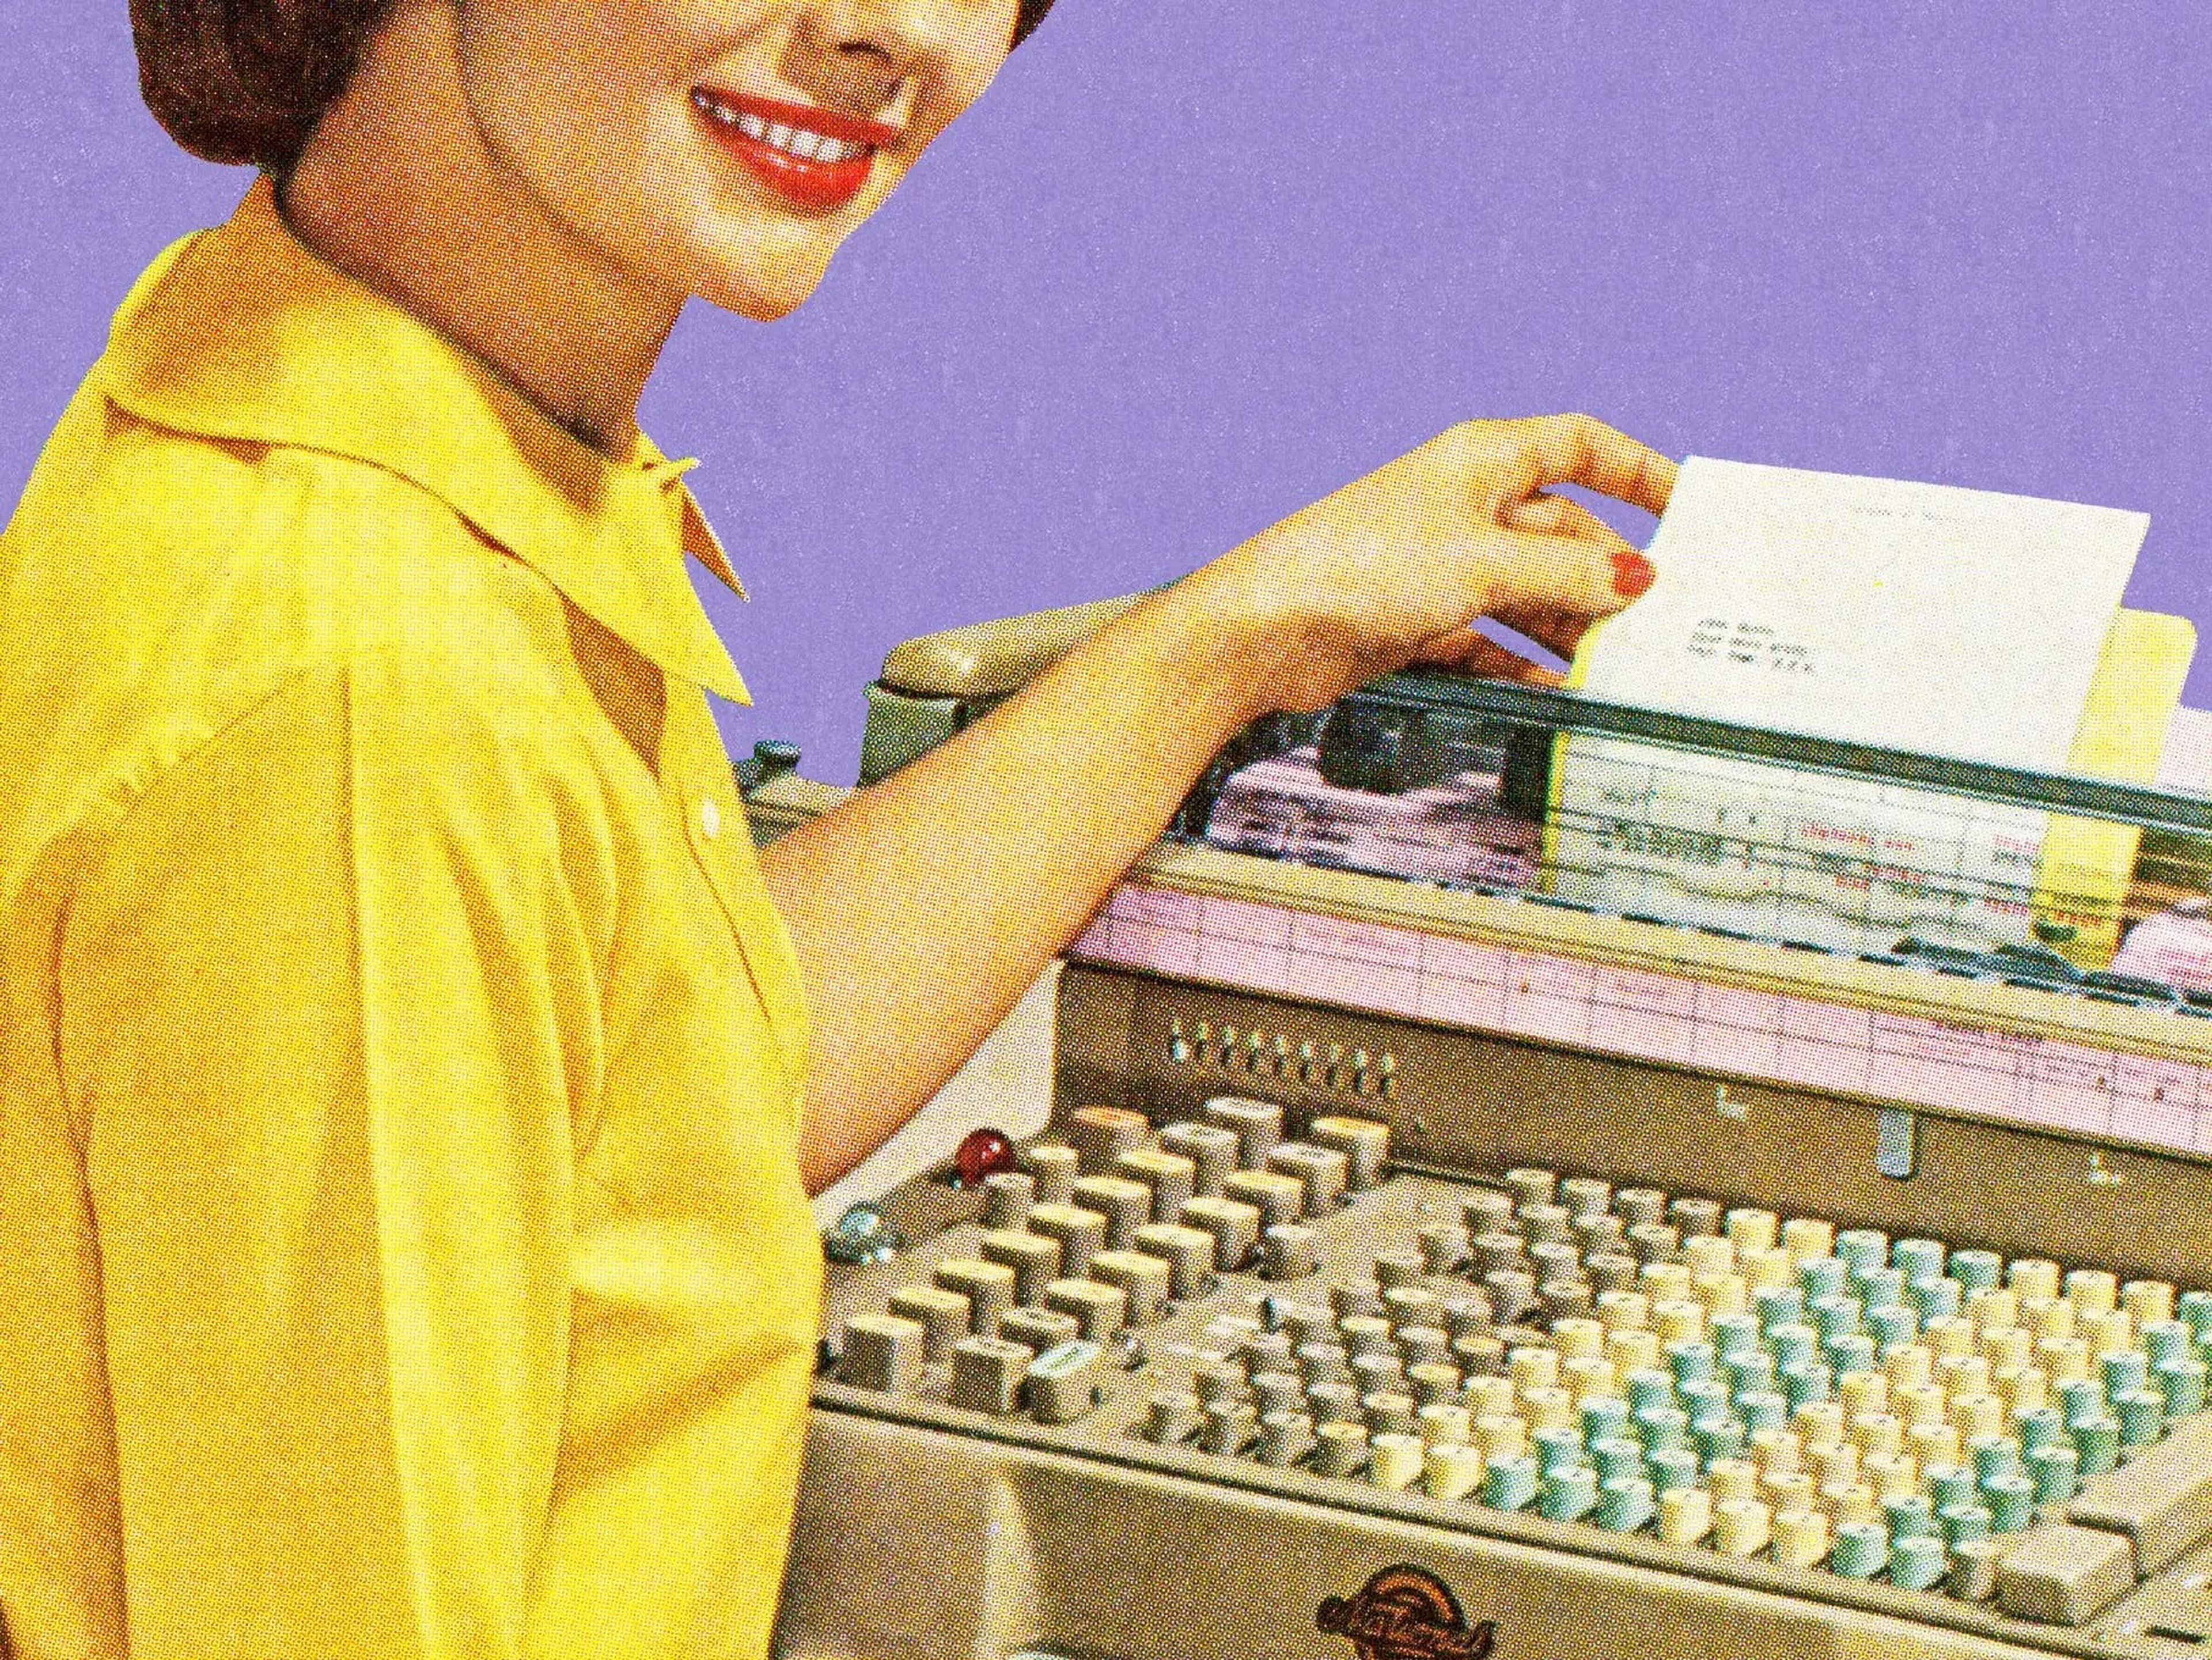 Vintage image of a woman using office equipment.